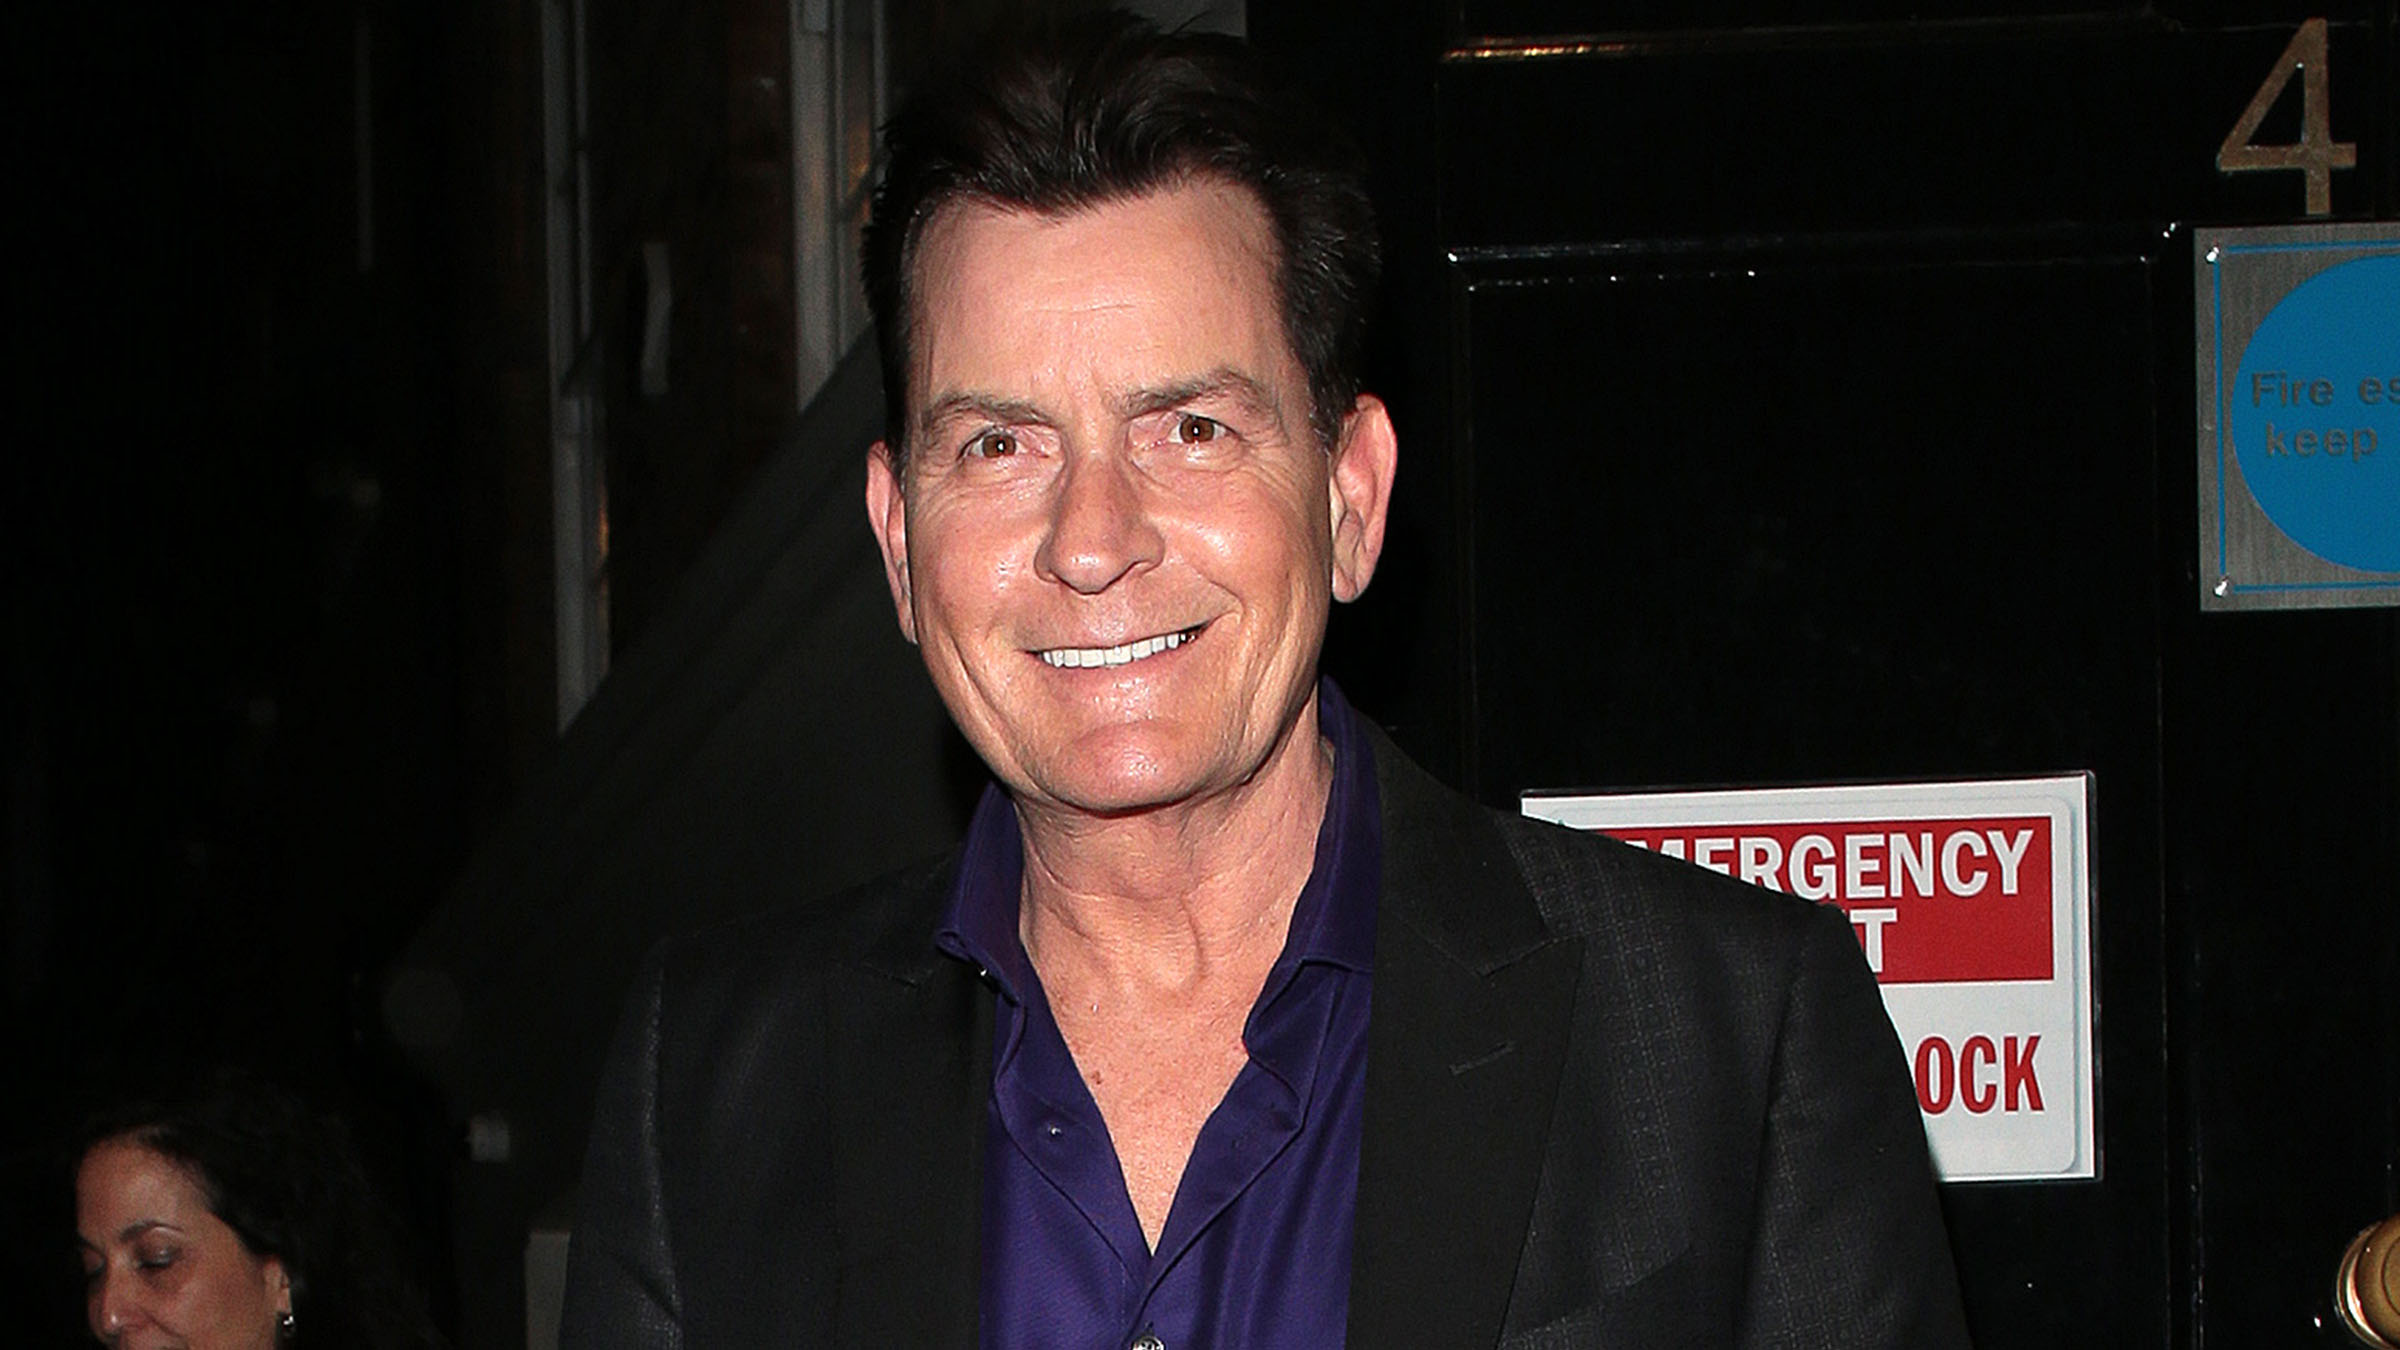 Charlie Sheen Set To Make TV Return With Co-Creator Of ‘Two And A Half Men’ For New Show